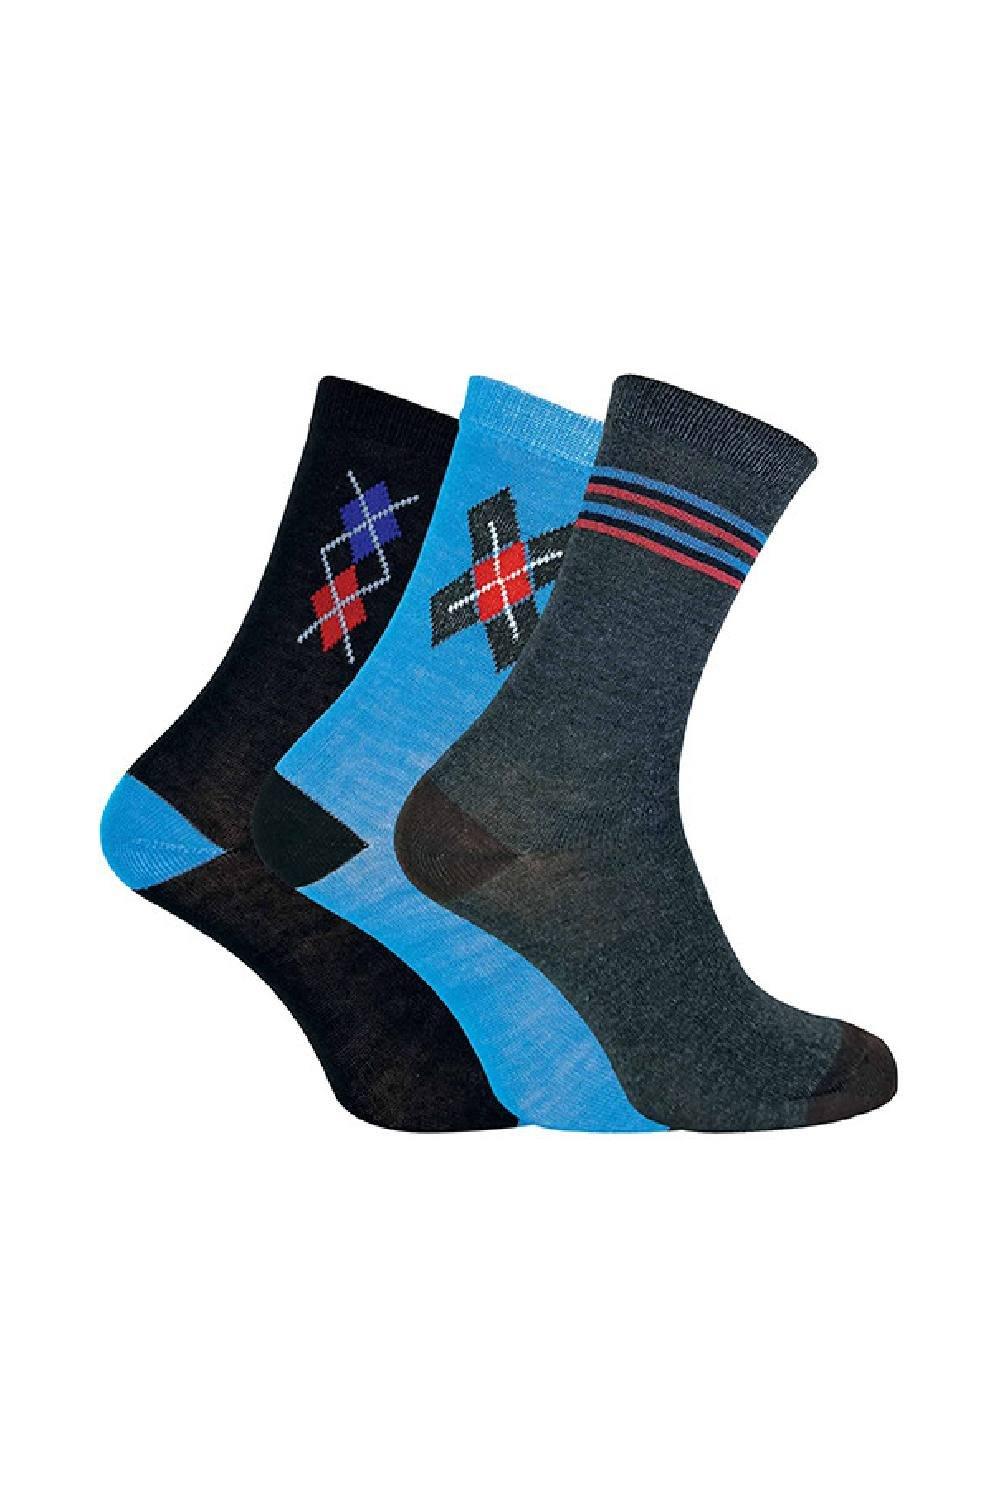 6 Pack Patterned Blue Argyle Striped Socks with Comfort Toe Seams